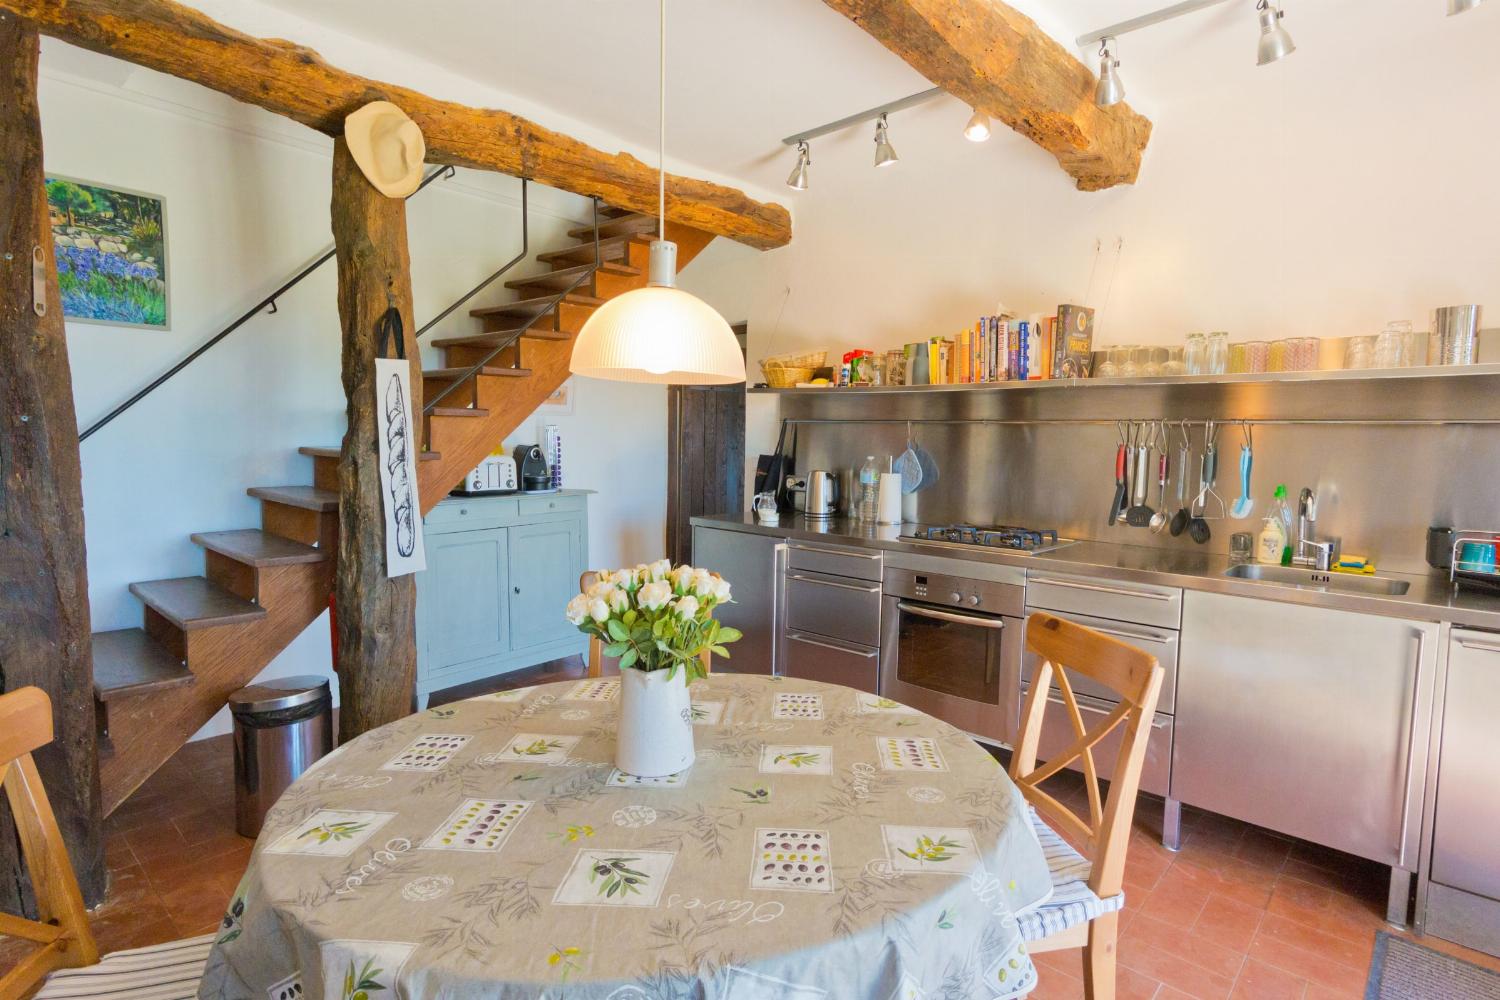 Kitchen | Vacation home in Provence